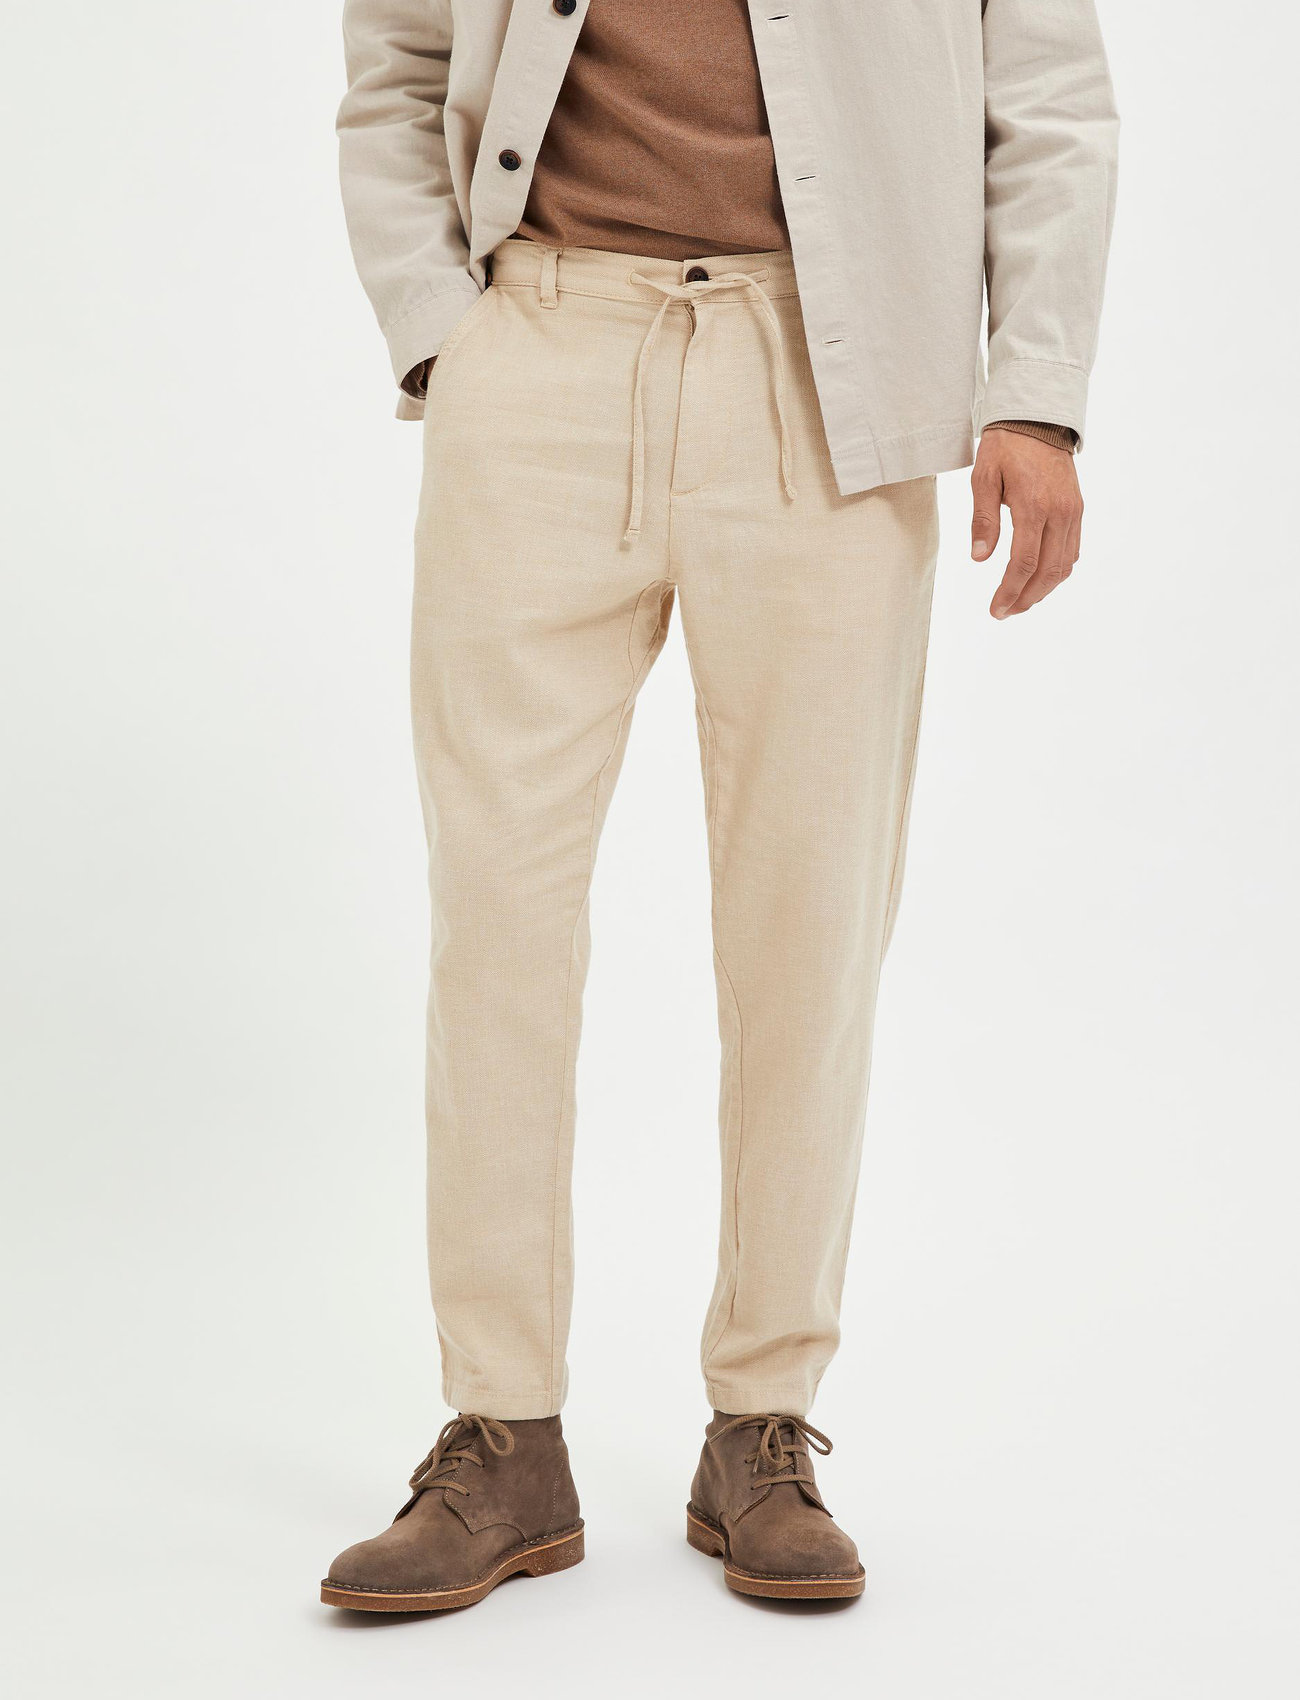 Selected Homme - SLH172-SLIMTAPE BRODY LINEN PANT NOOS - linen trousers - incense - 0